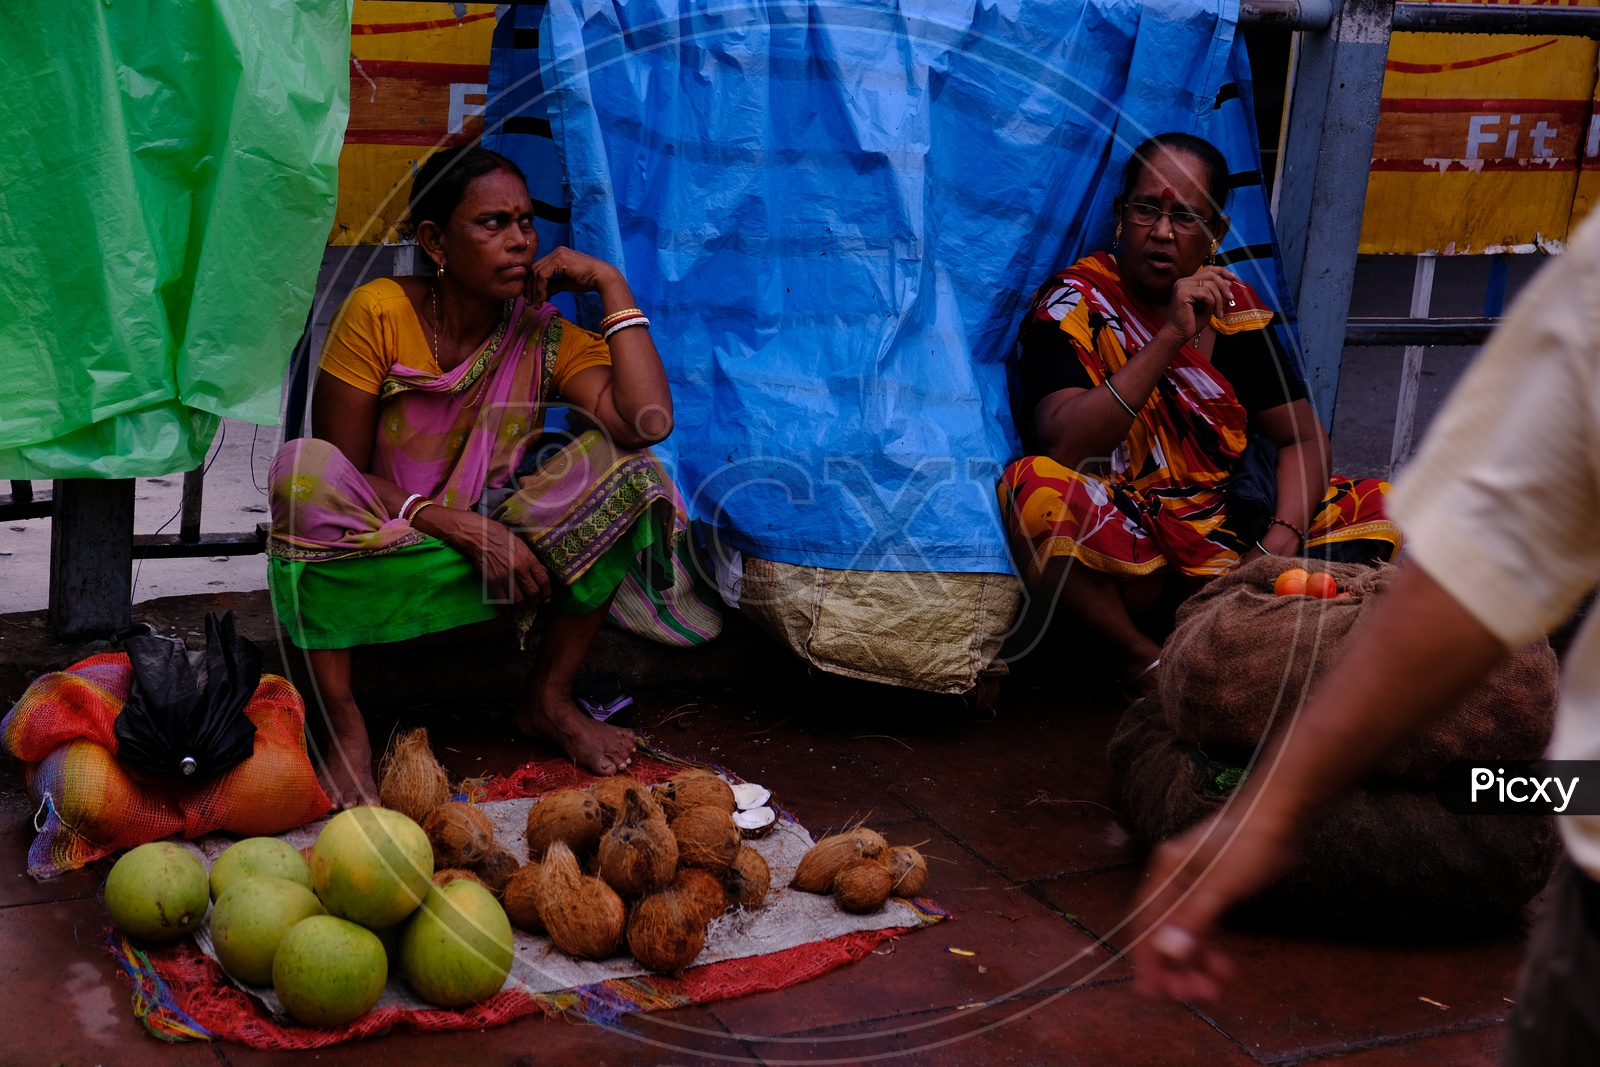 Indian Street Vendor Woman selling Coconuts